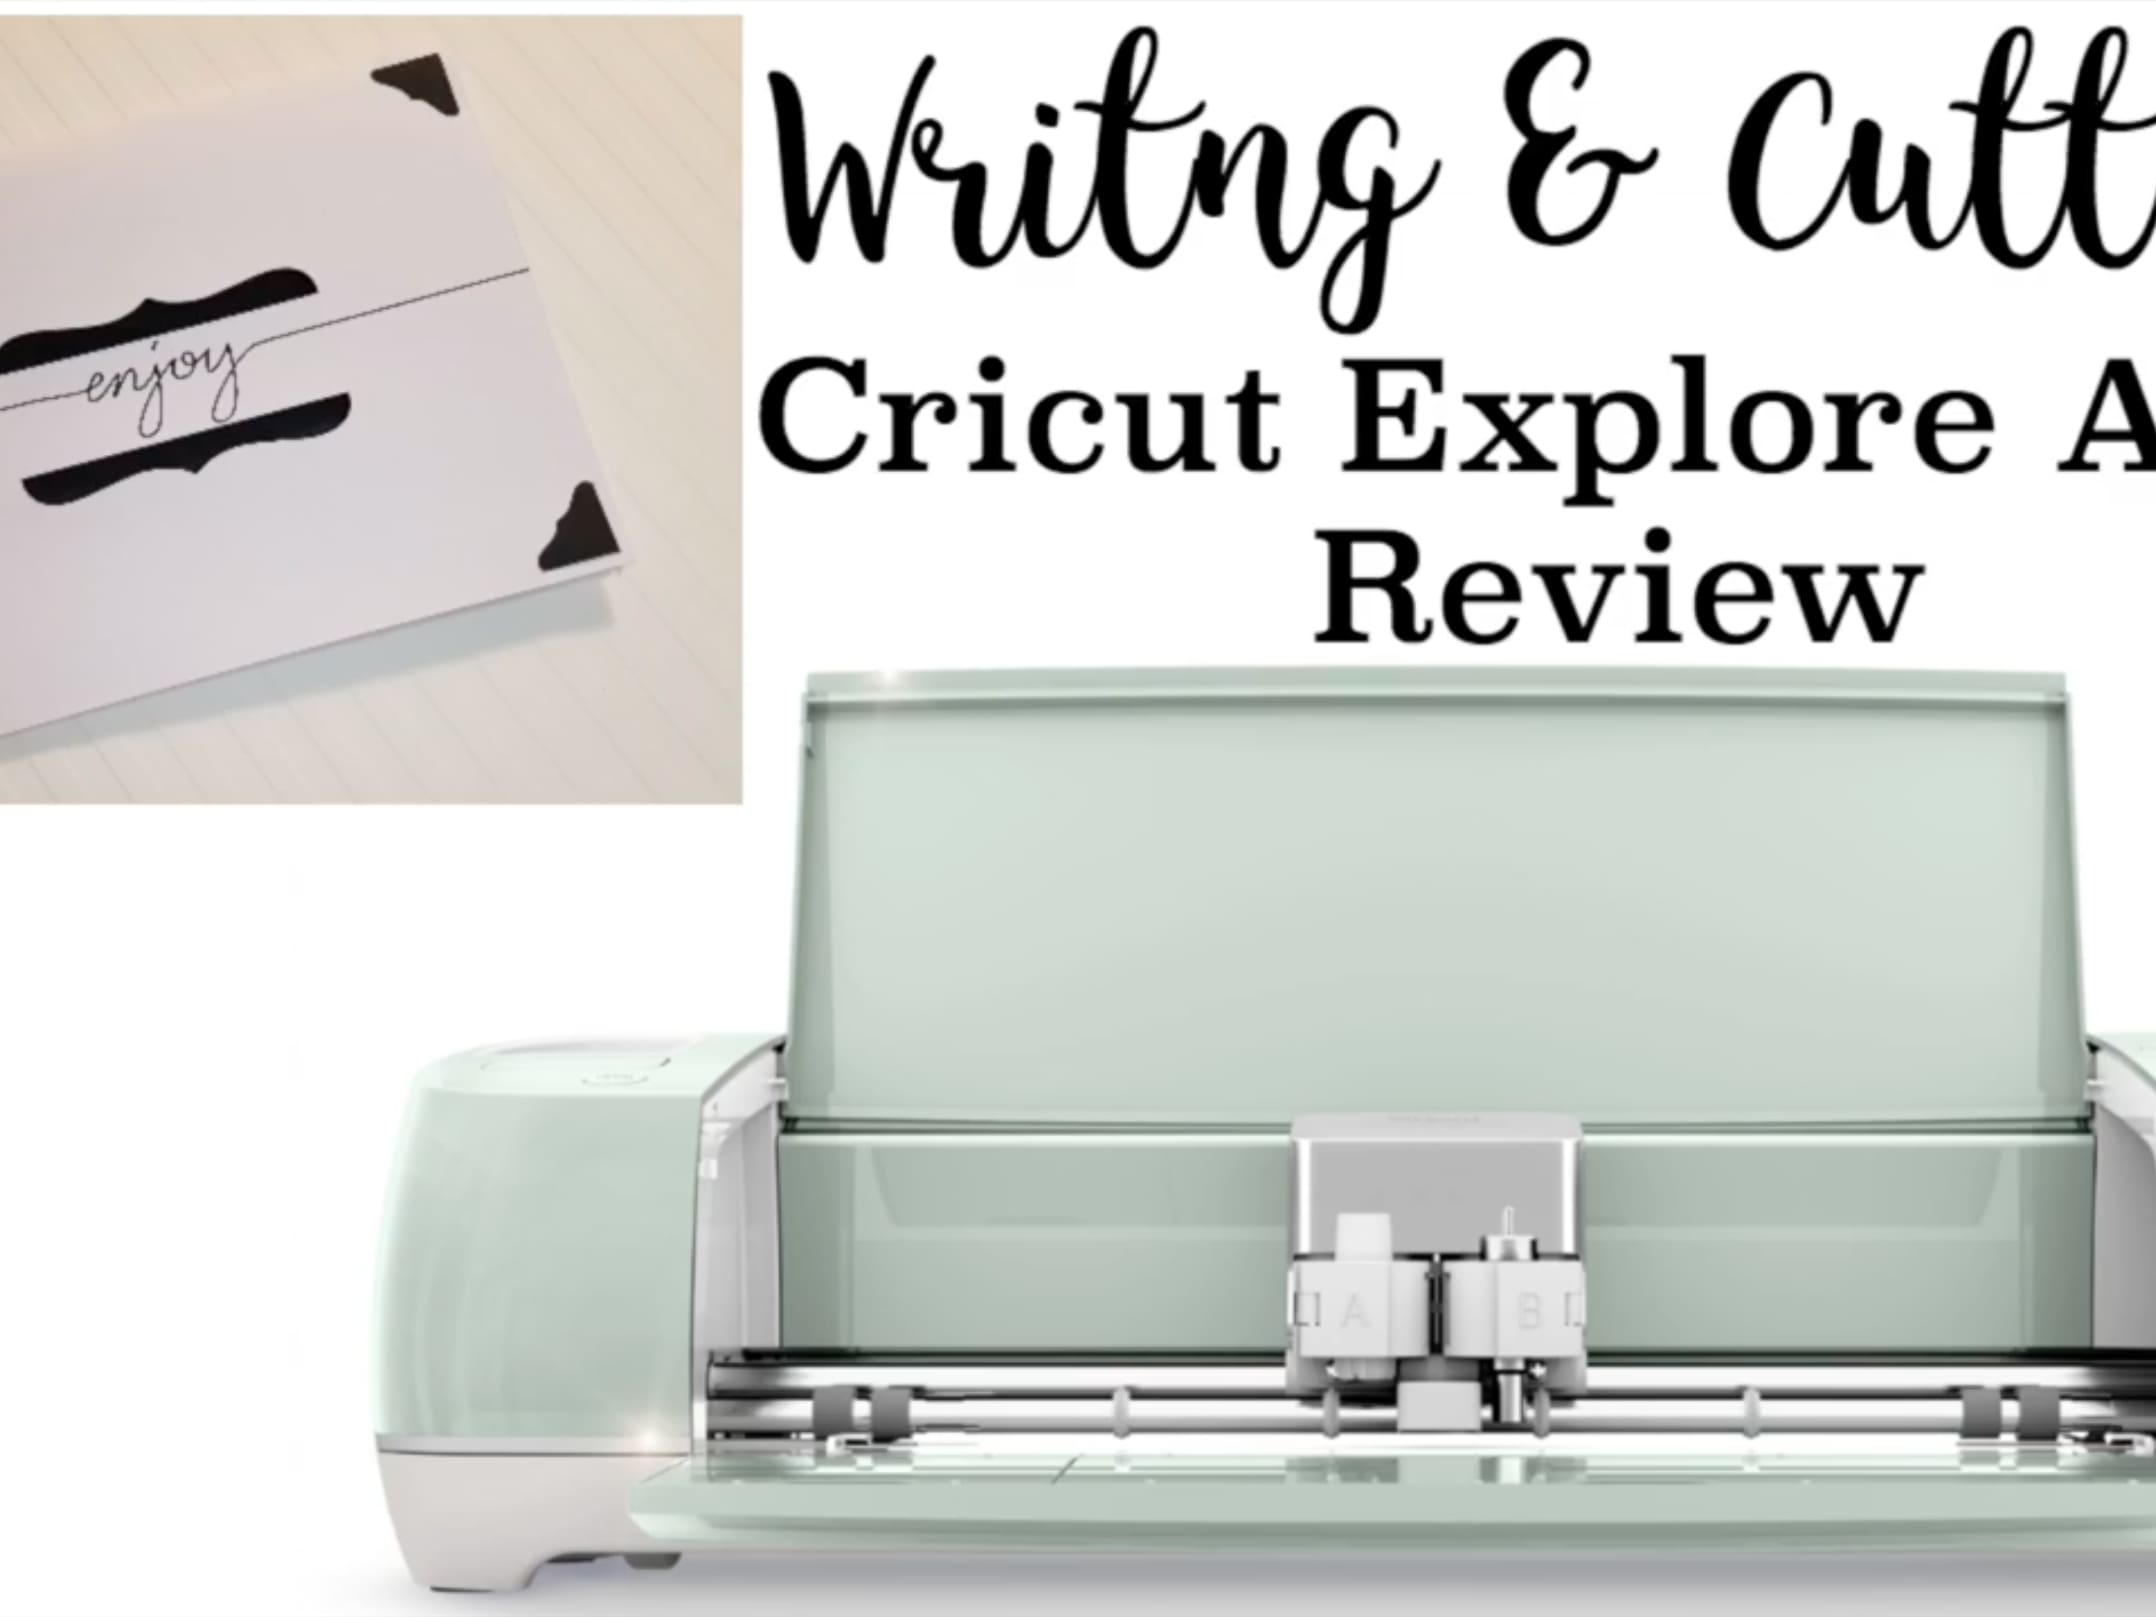  Cricut Explore Air 2 - A DIY Cutting Machine for all Crafts,  Create Customized Cards, Home Decor & More, Bluetooth Connectivity,  Compatible with iOS, Android, Windows & Mac, Mint